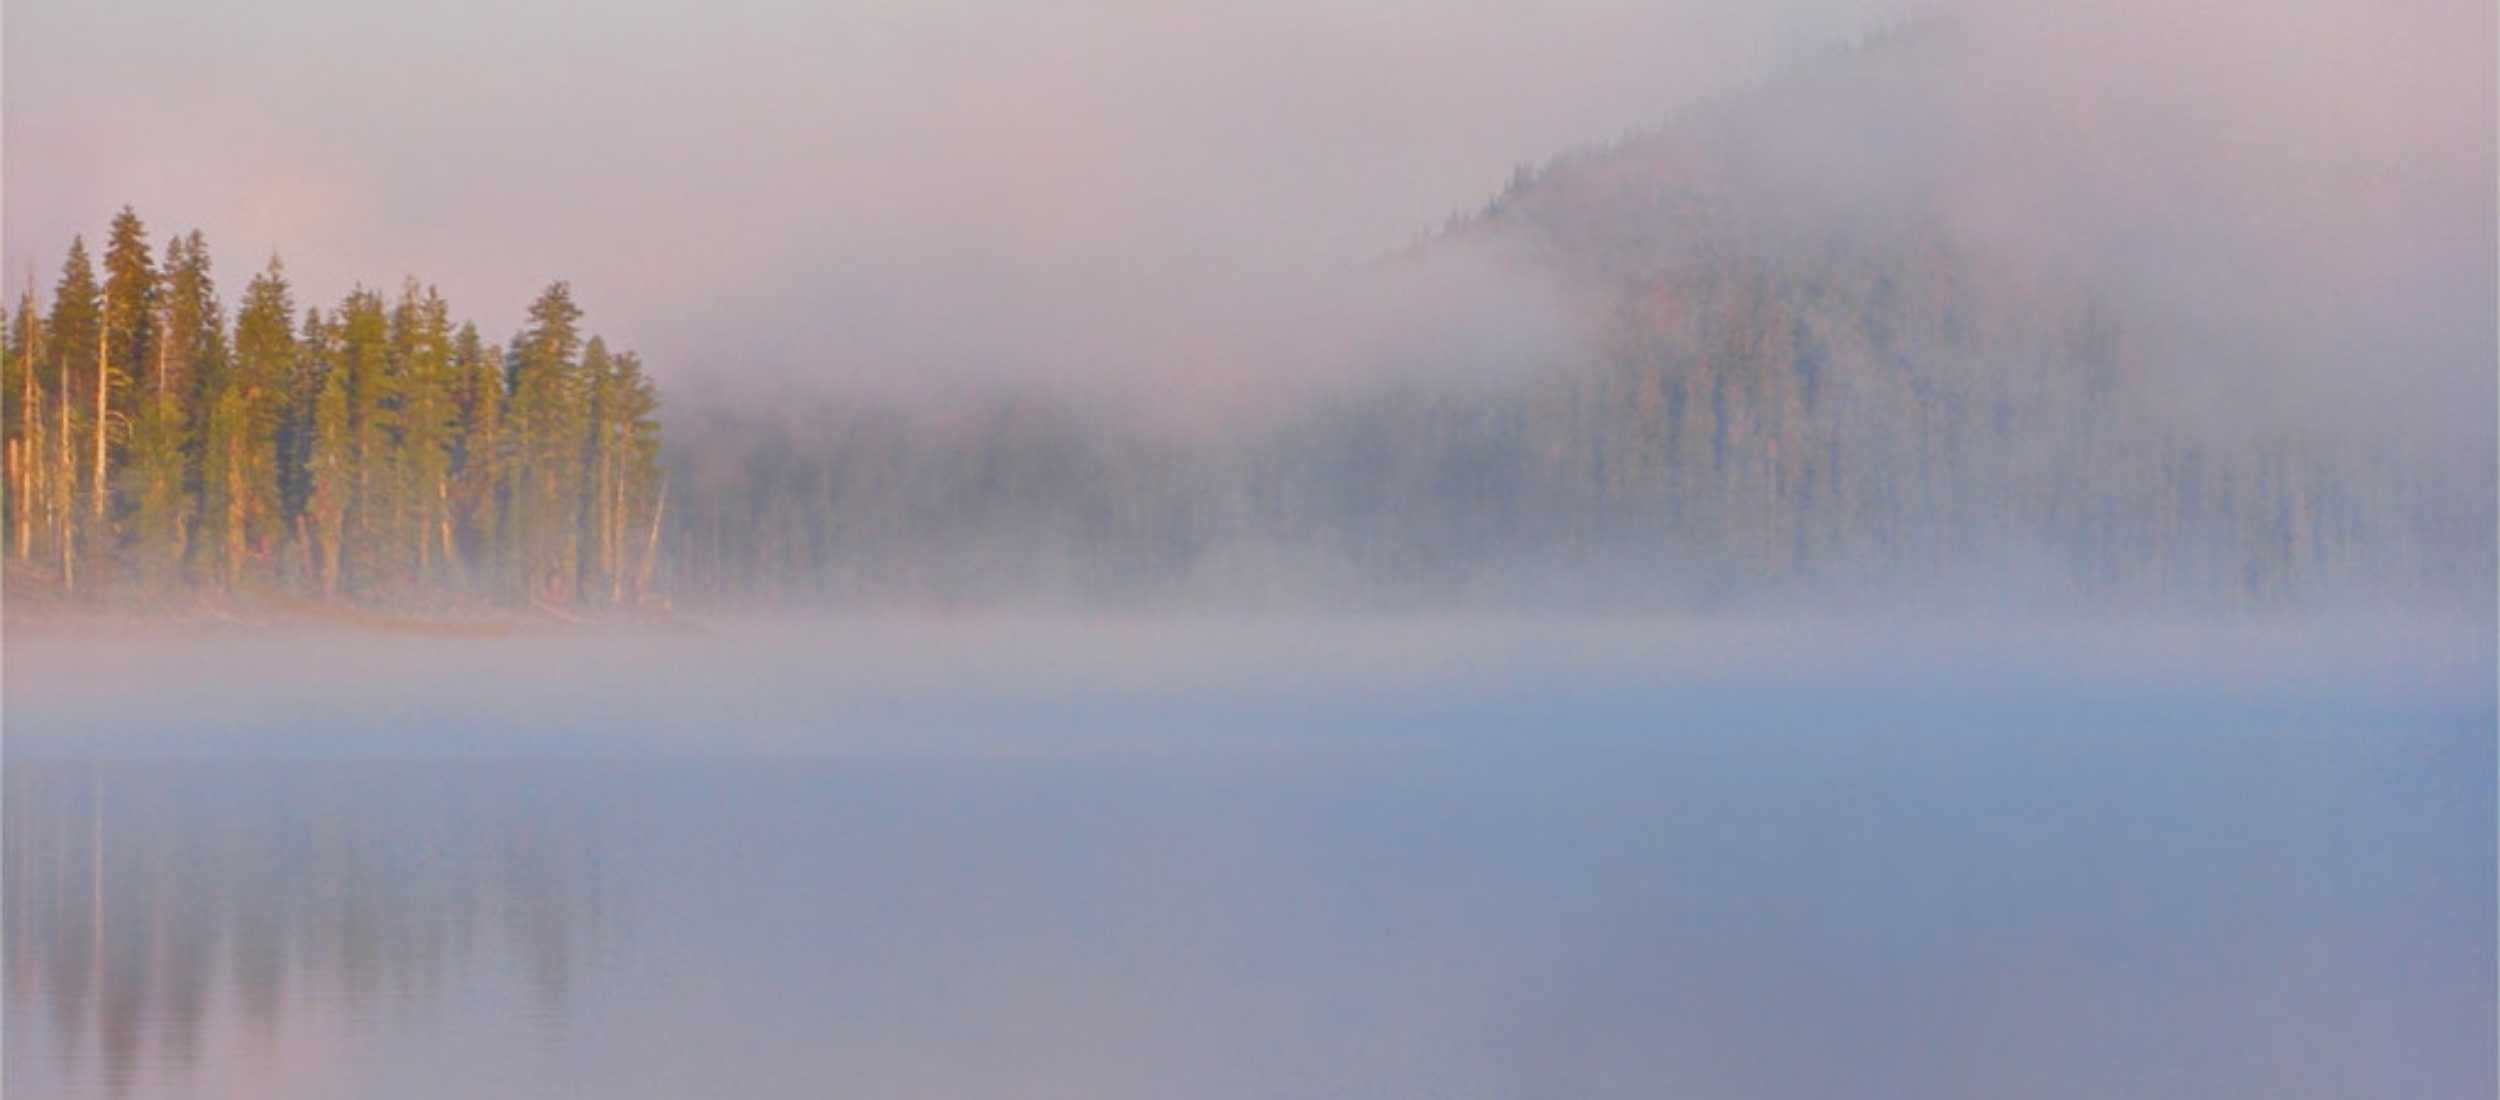 Early morning Juniper Lake blanketed in mist